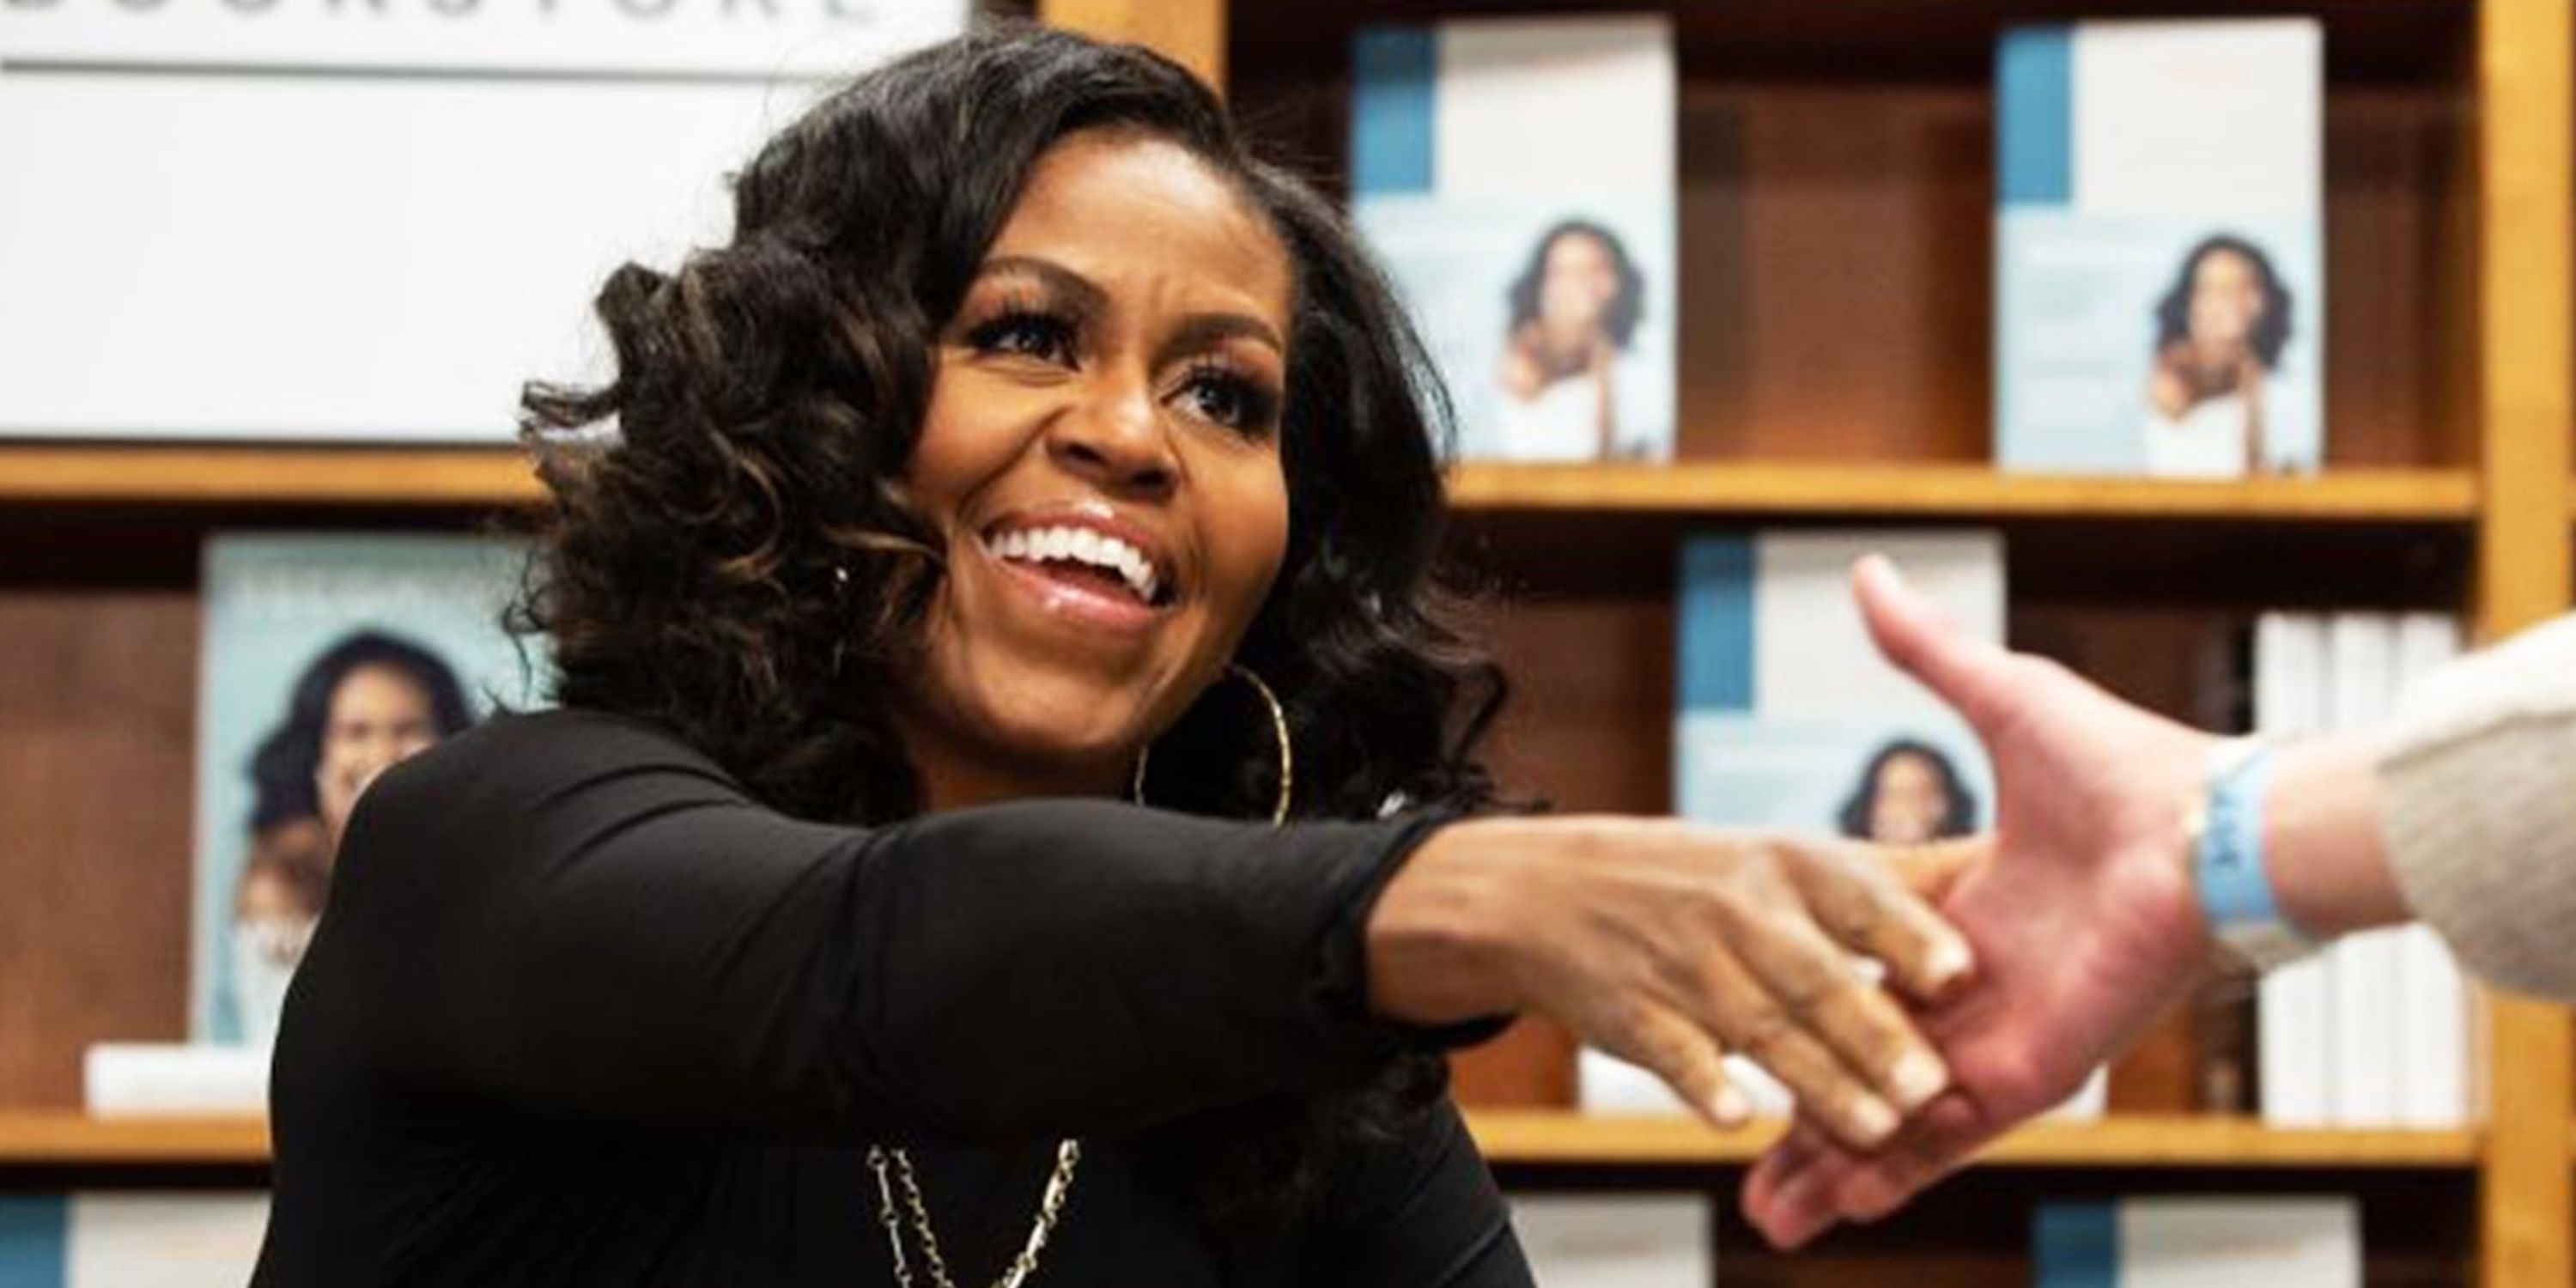 Michelle Obama in Becoming on Netflix